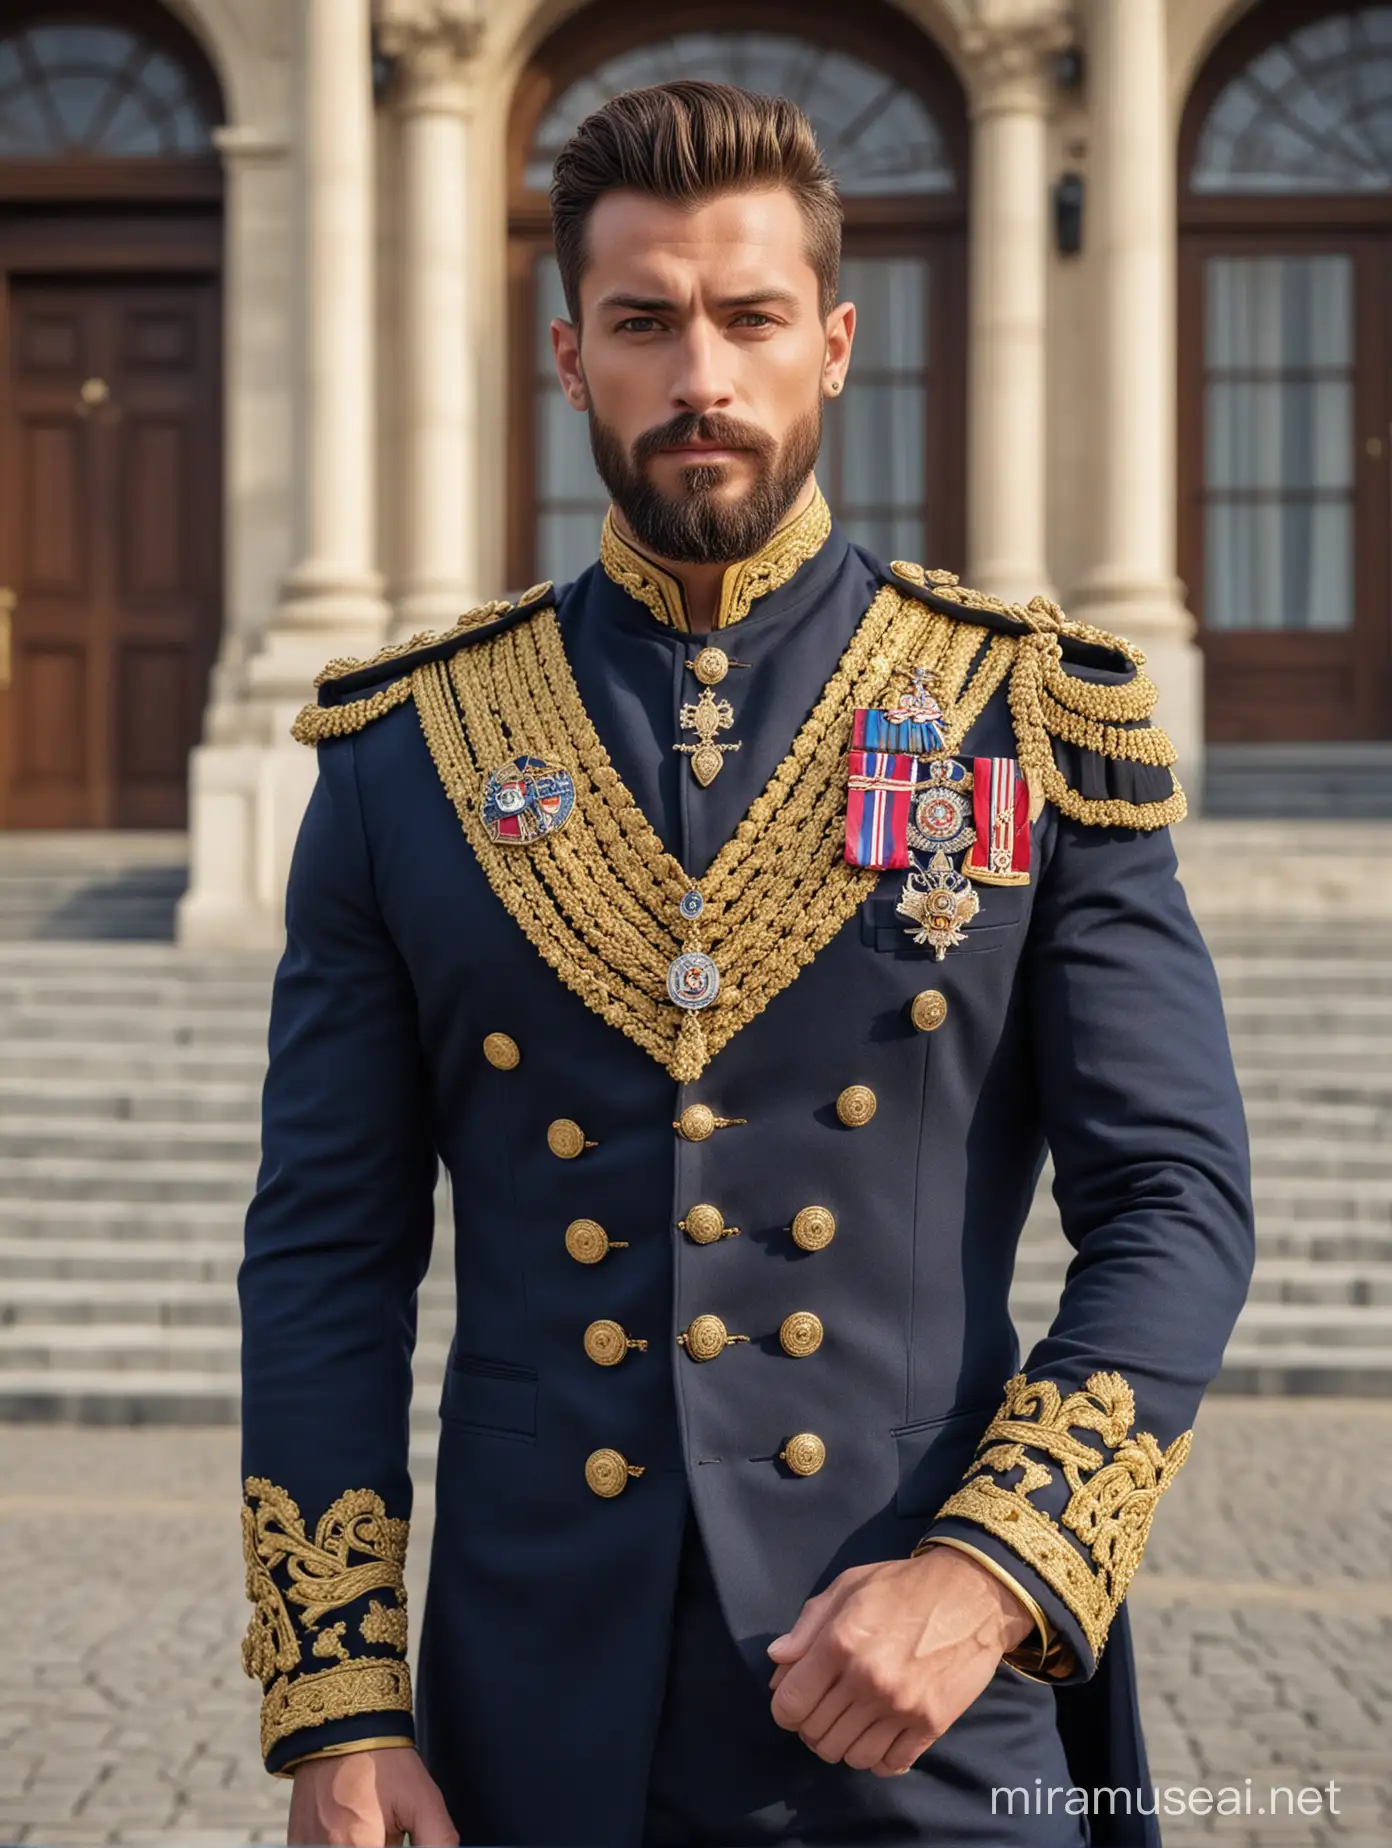 Tall and handsome bodybuilder king with beautiful hairstyle and beard with attractive eyes and Broad shoulder and chest in royal Navy and golden cavalry suit with navy cape, necklace and badges standing outside palace